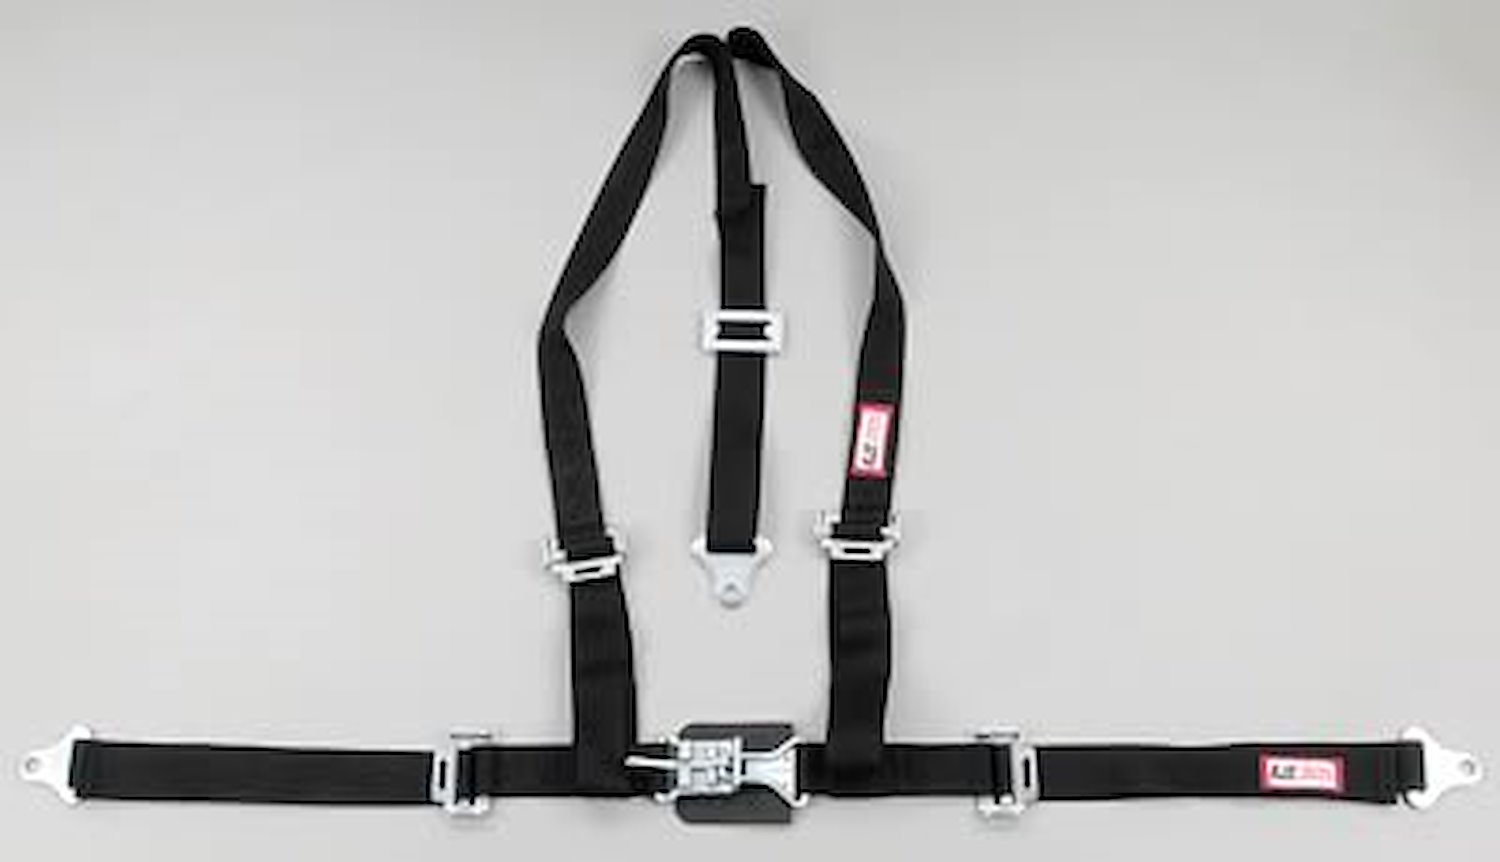 NON-SFI L&L HARNESS 3 PULL UP Lap Belt SNAP SEWN IN 2 Shoulder Harness V ROLL BAR Mount BOLT YELLOW